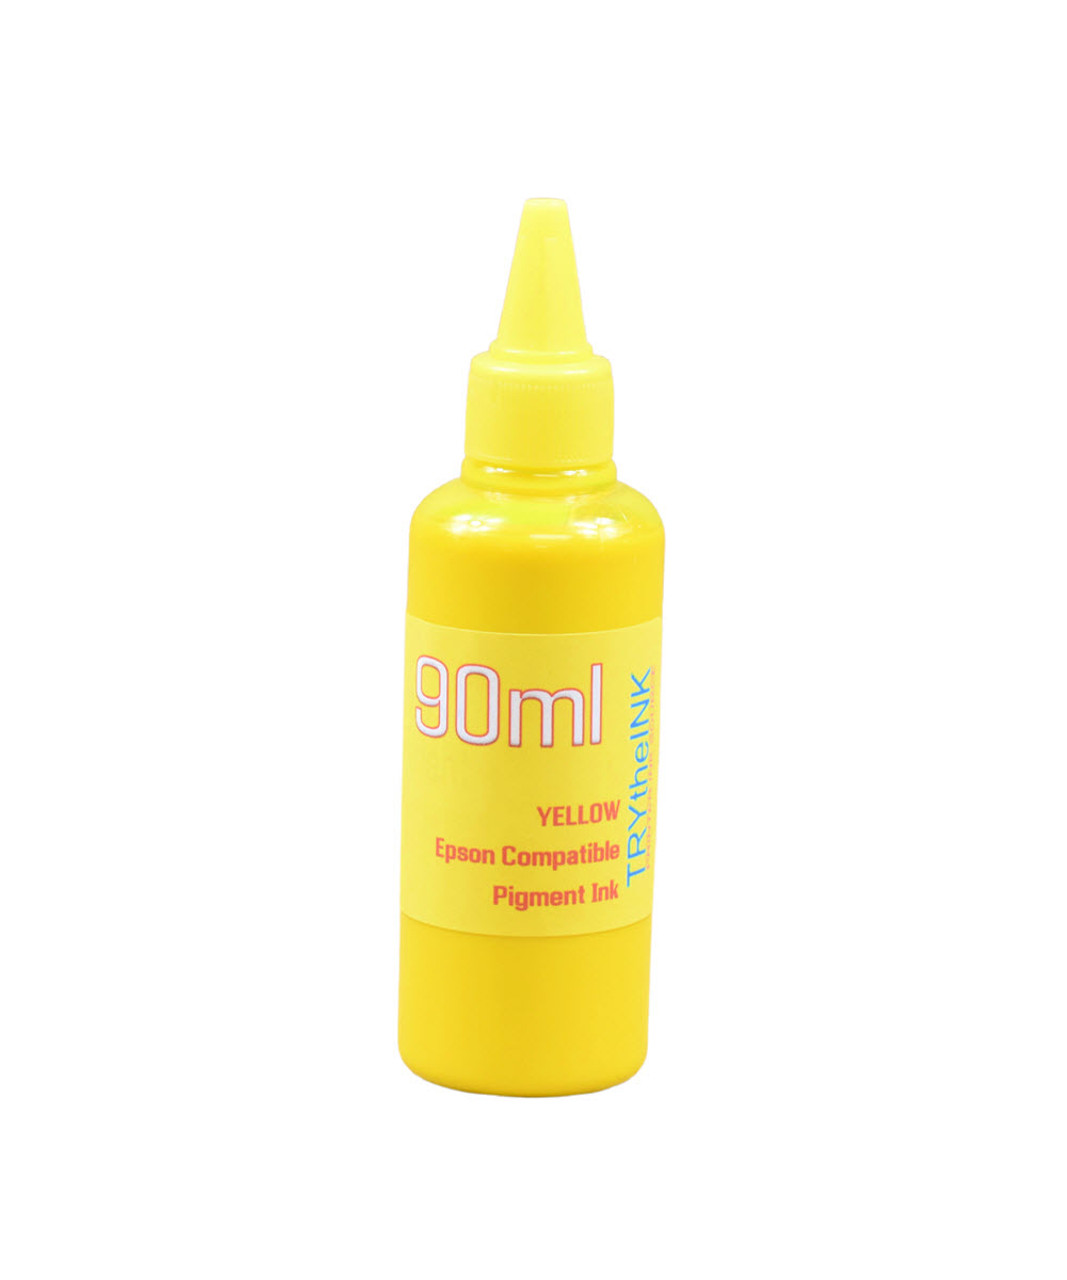 Yellow 90ml bottles Pigment Ink for Epson WorkForce WF-3540, WorkForce WF-7010, WorkForce WF-7510, WorkForce WF-7520 Printers